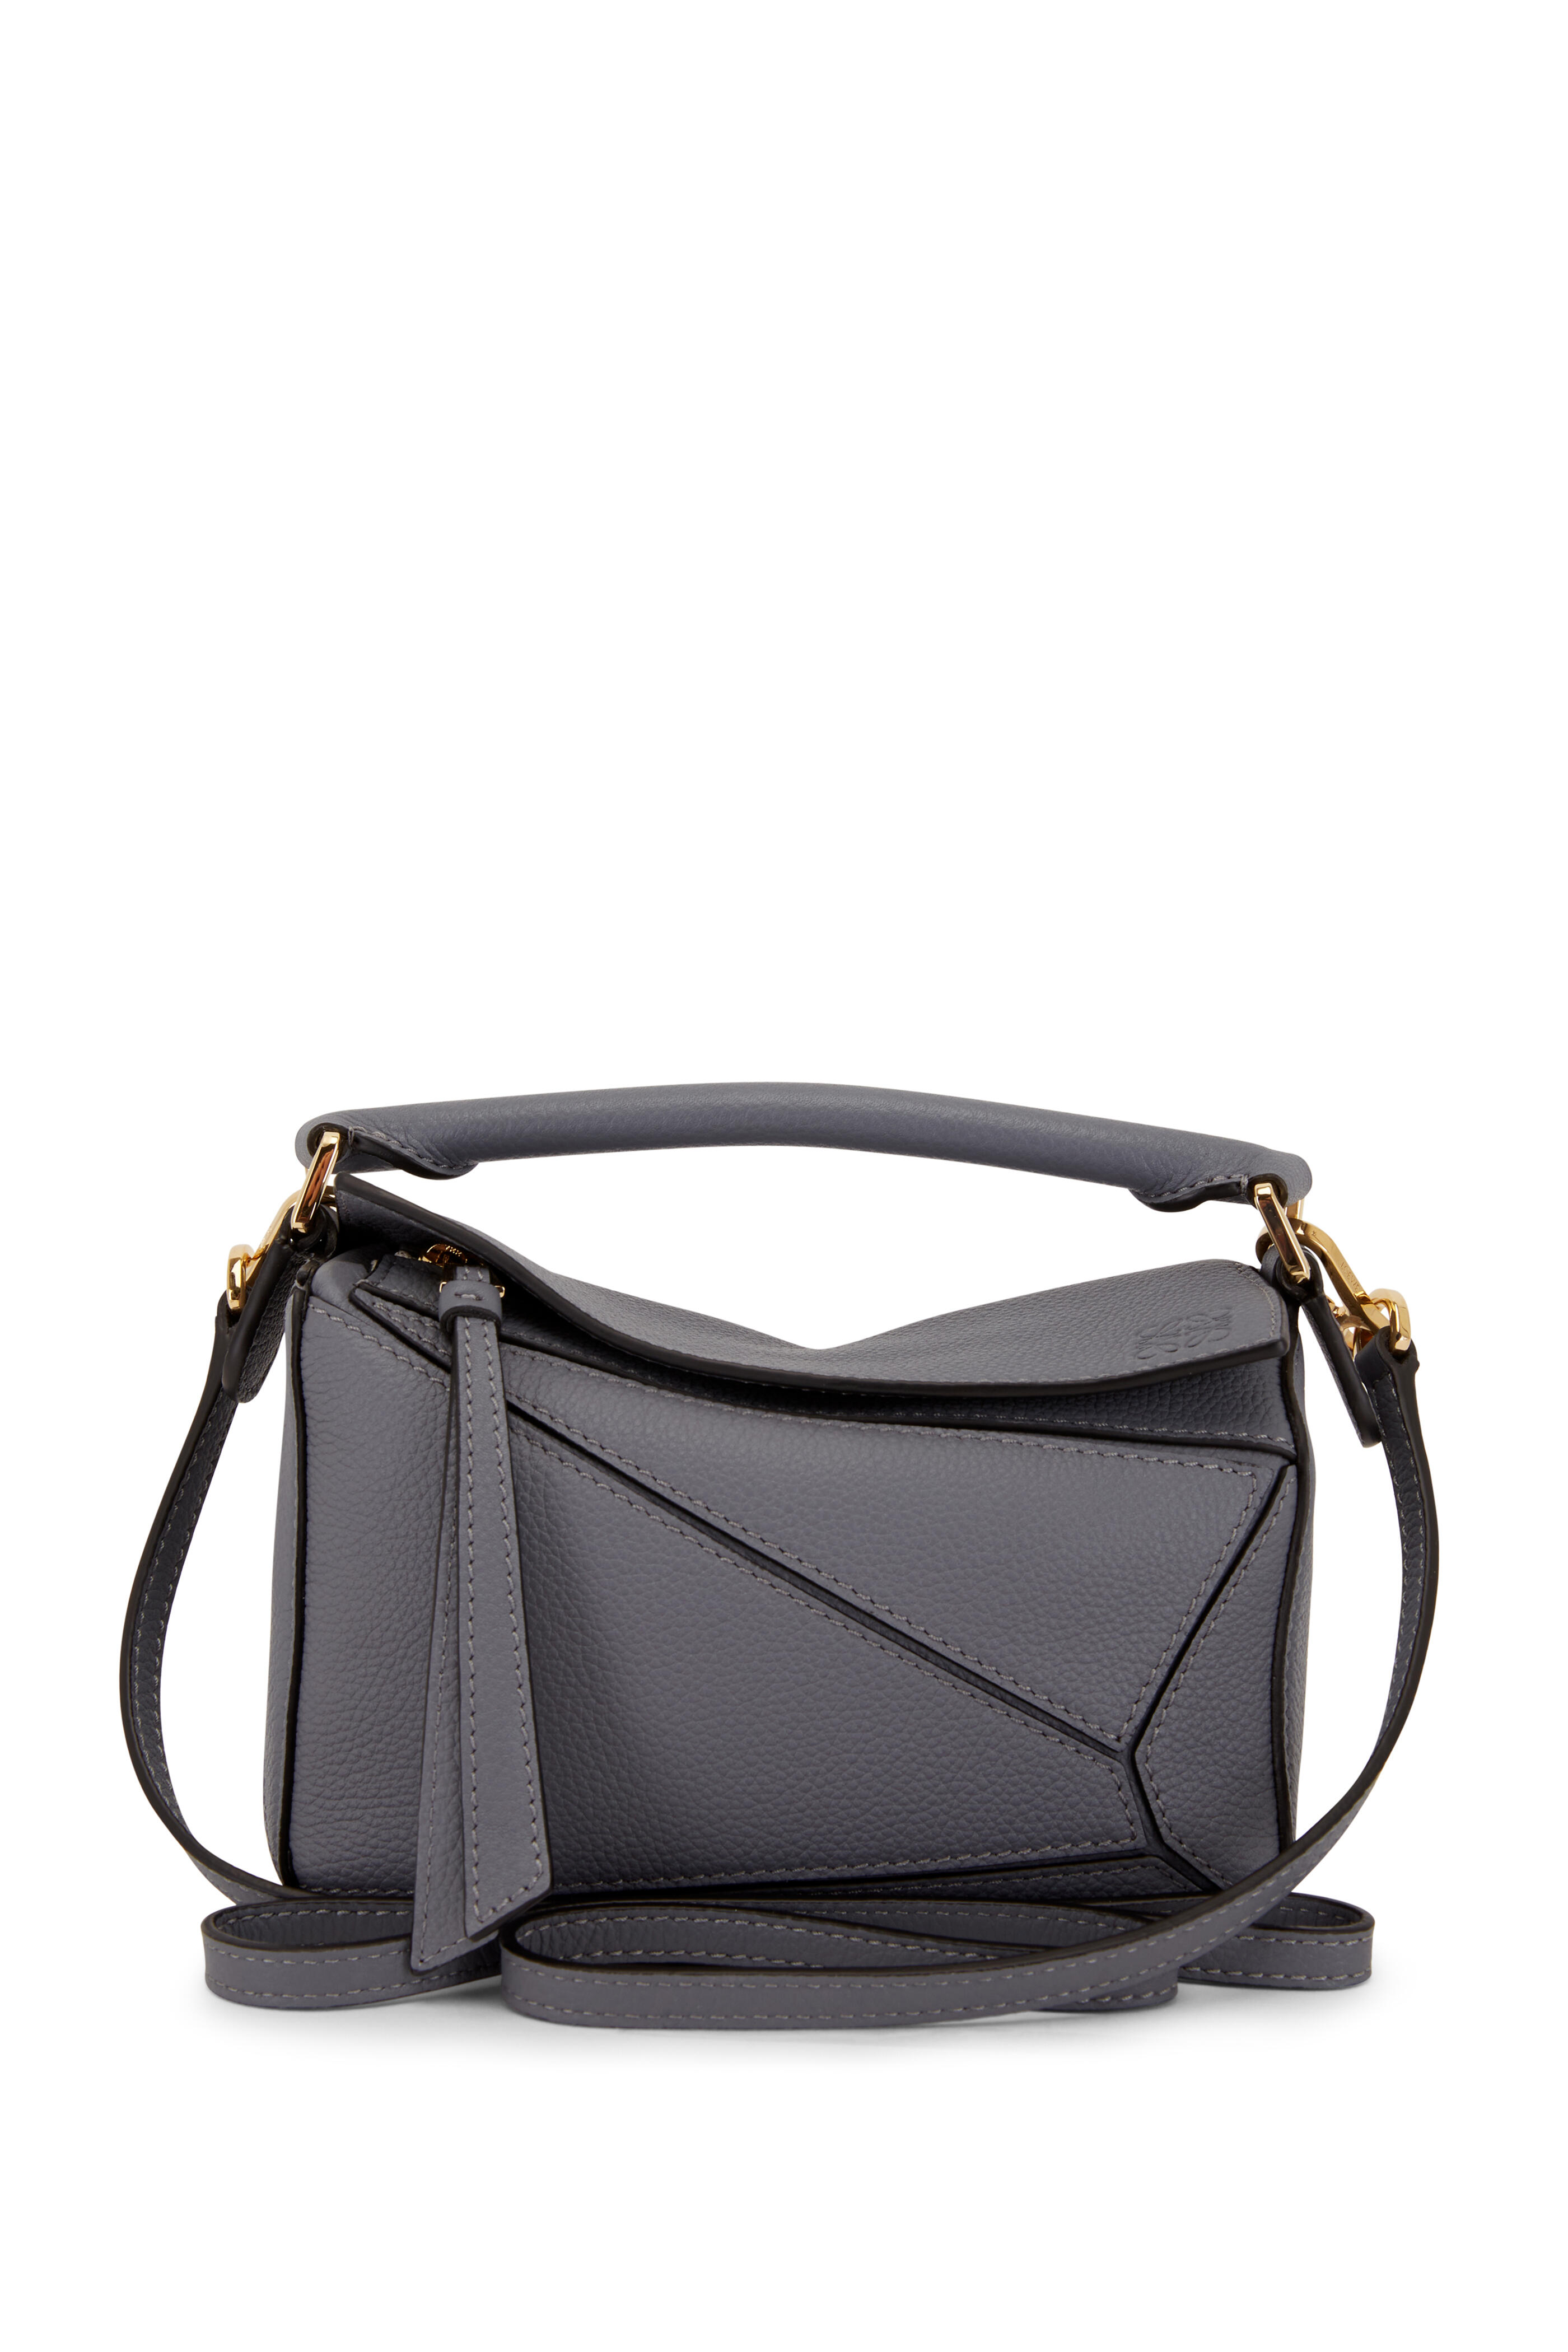 LOEWE black Small Leather Puzzle Top-Handle Bag